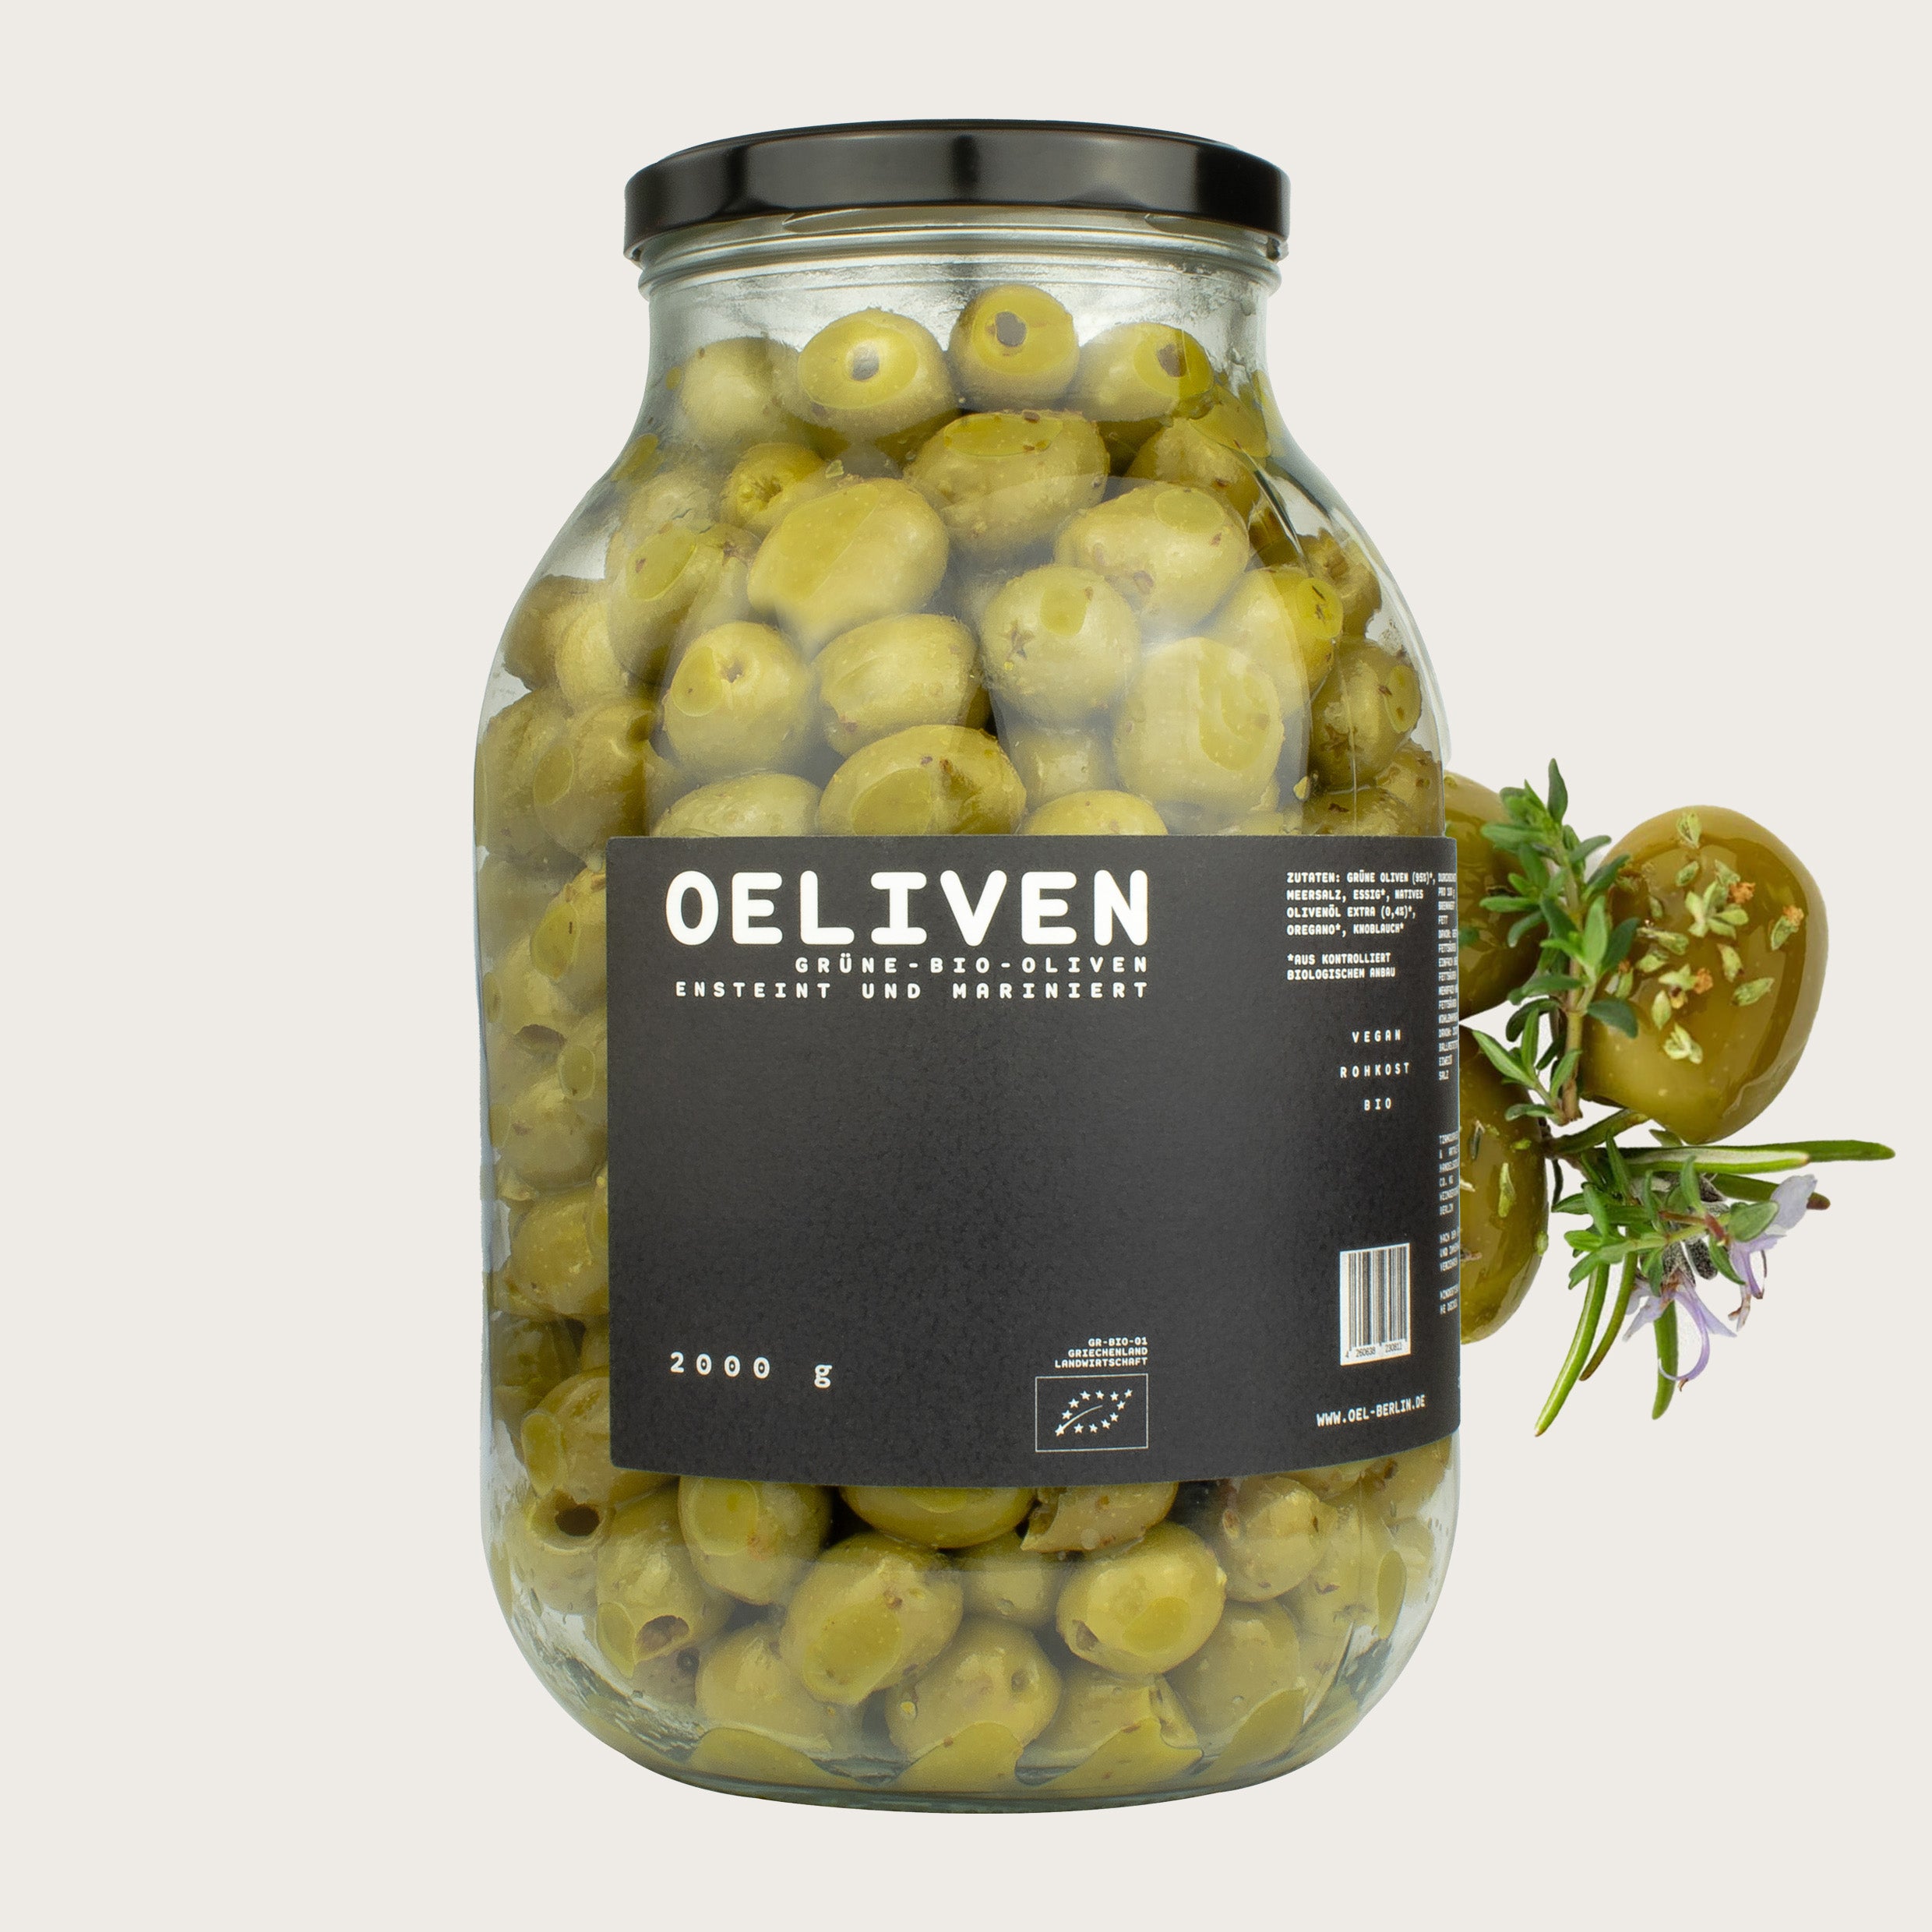 OELiven Green 2,000 g - Green organic olives with herbs